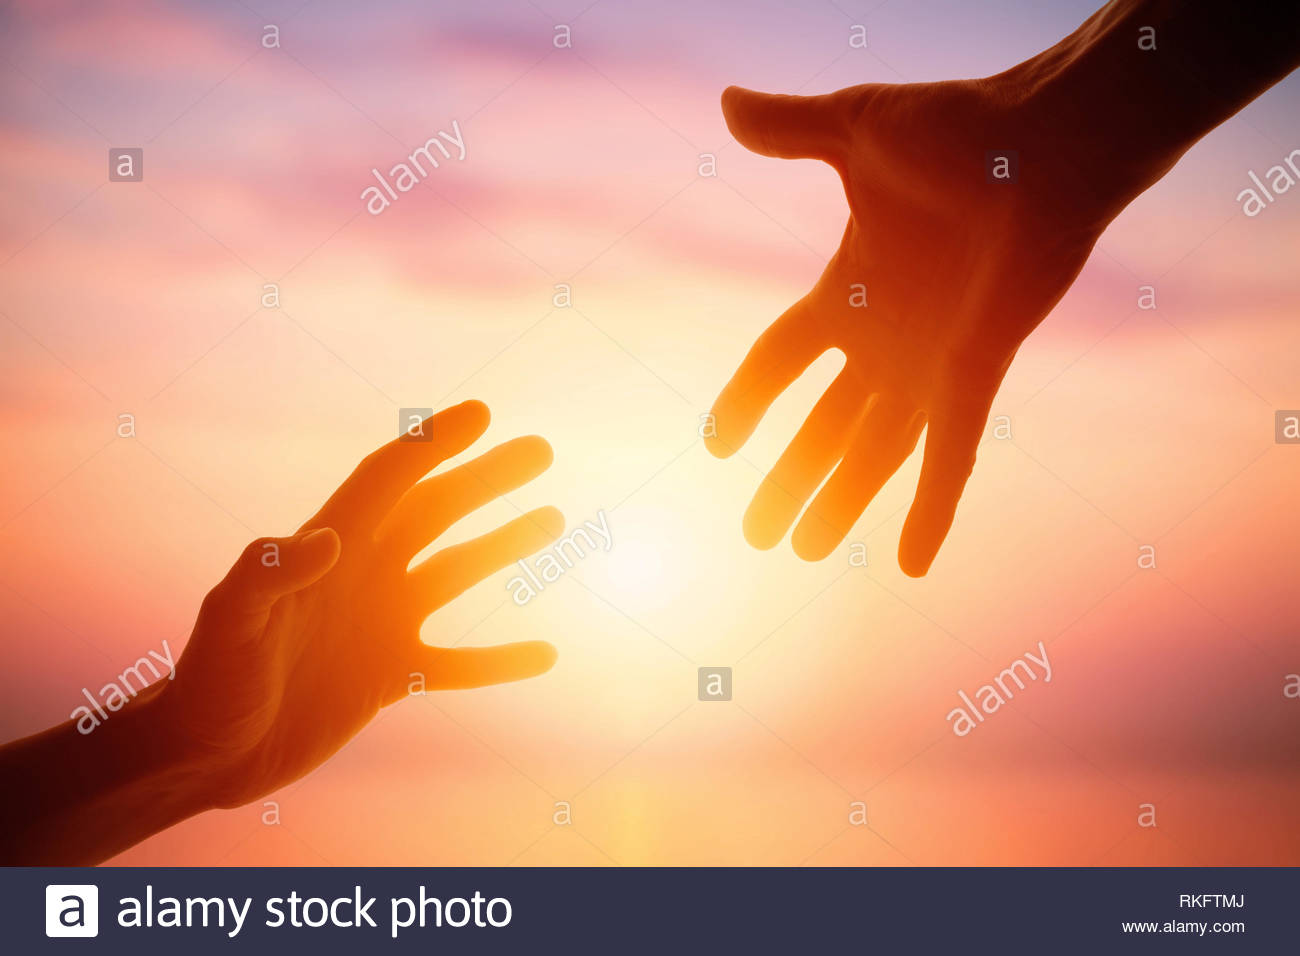 Giving A Helping Hand On The Background Of Dawn Stock Photo